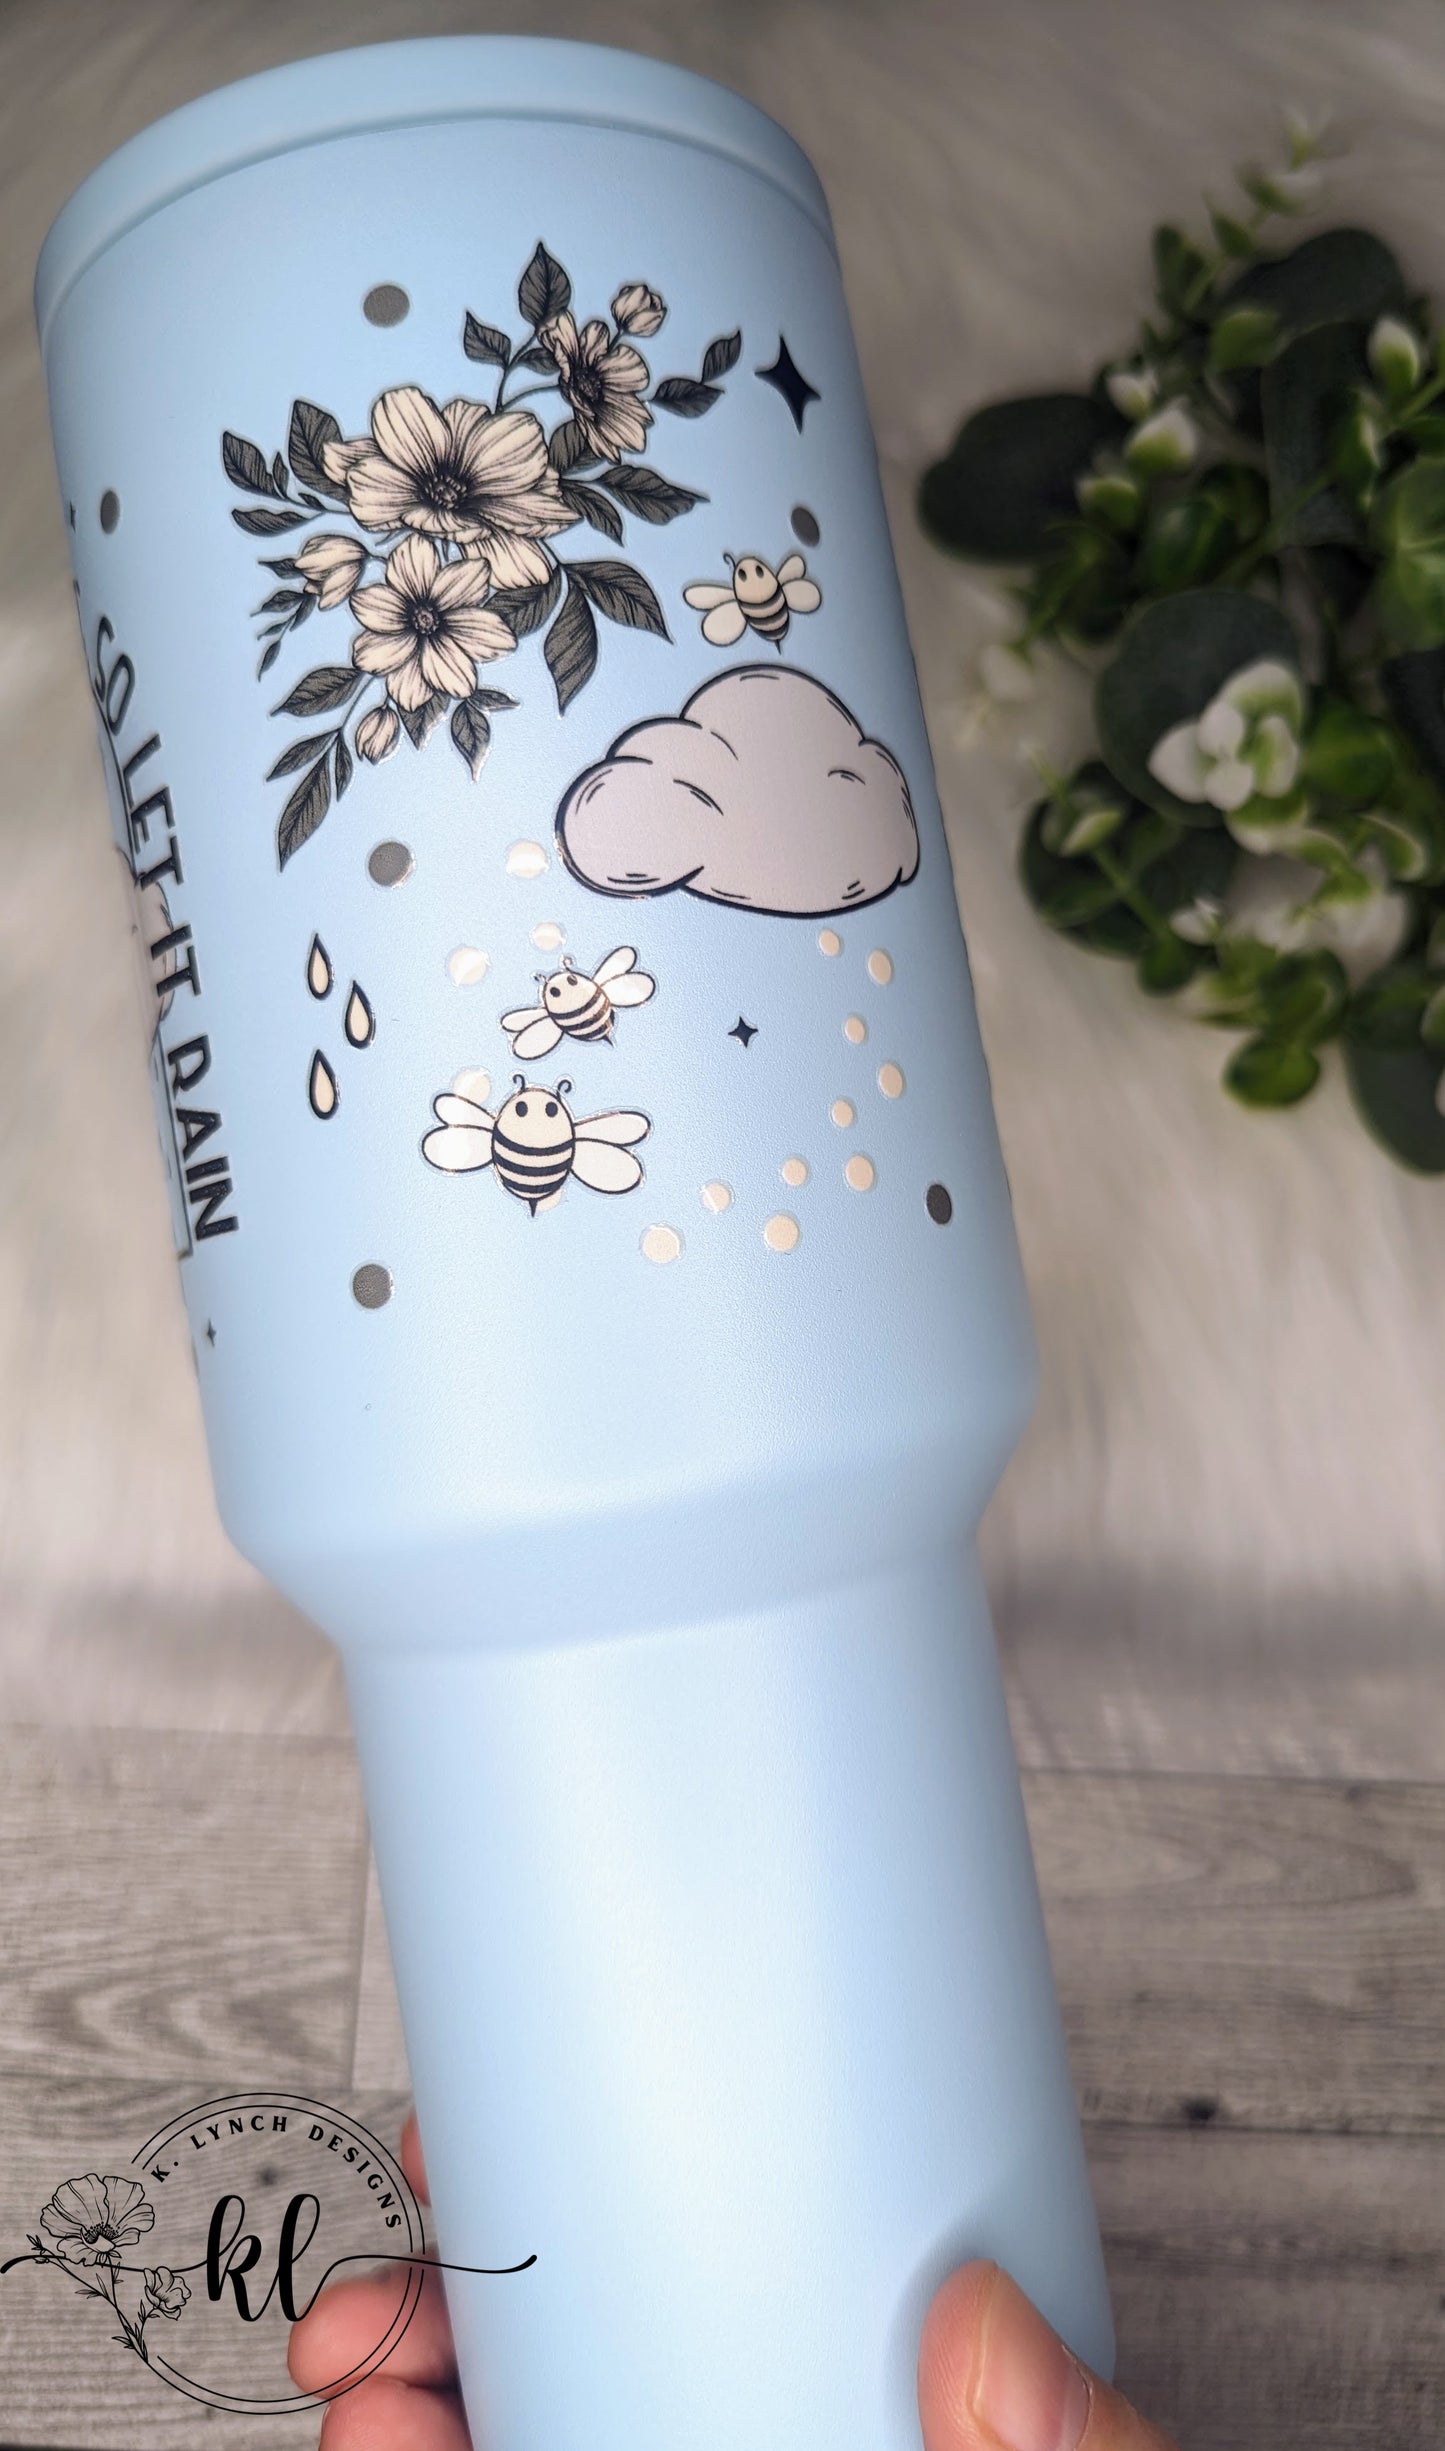 40 oz. Handle Tumbler "I Can Handle Anything So Let It Rain"